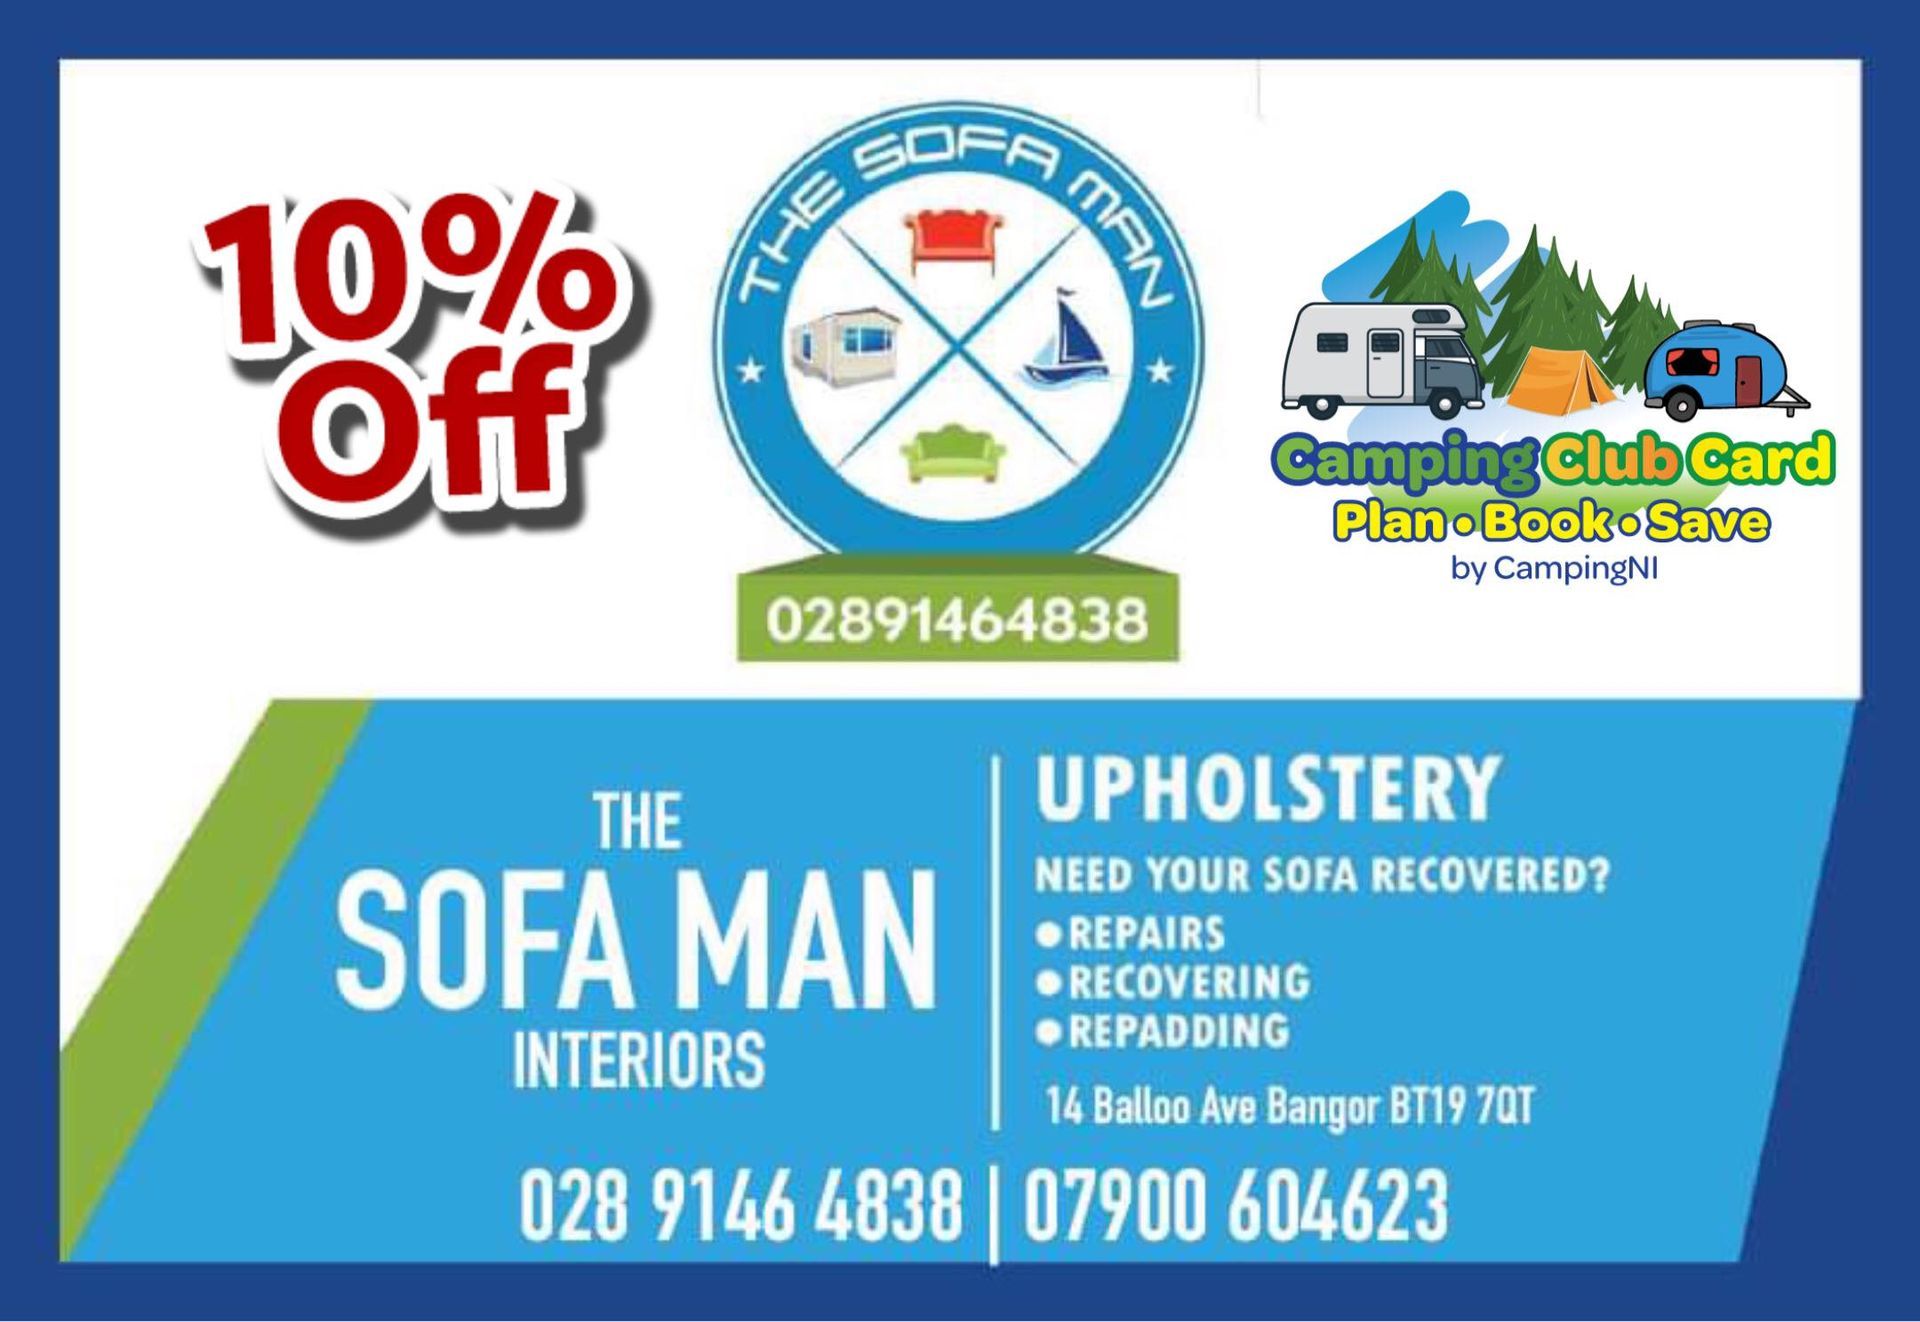 Check out The Sofaman Bangor for all you upholstery needs